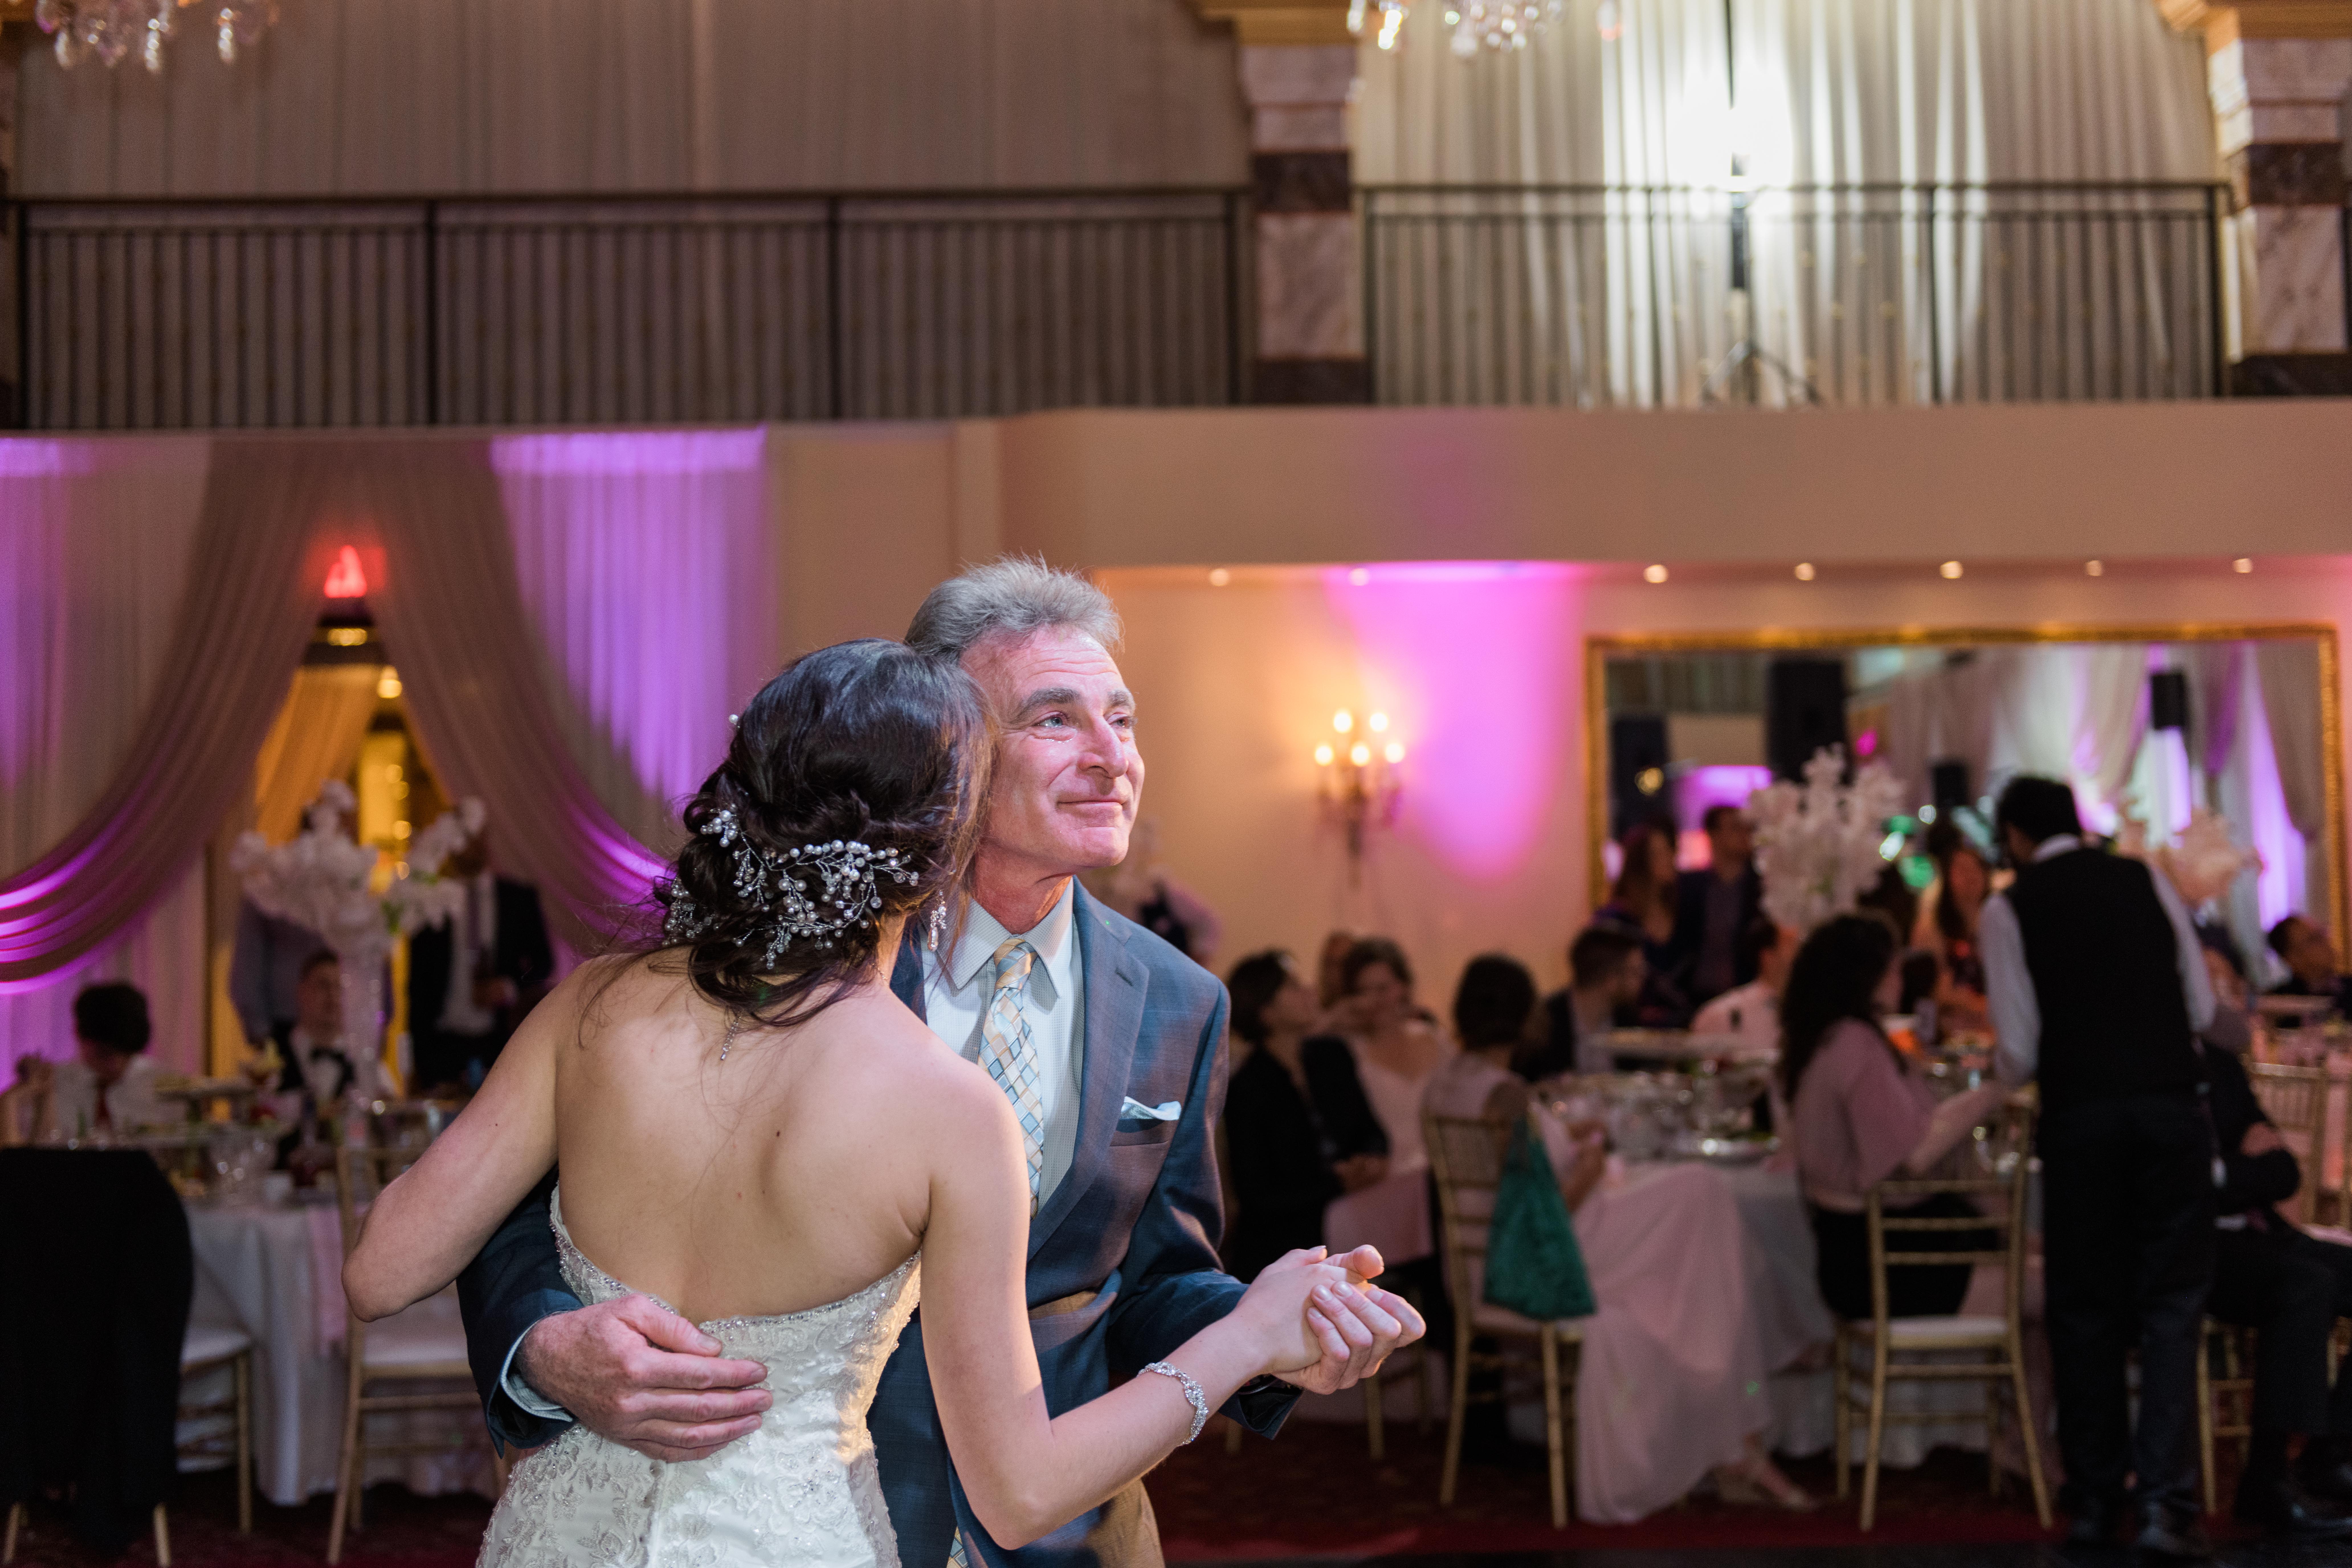 Father of the bride dancing with his daughter